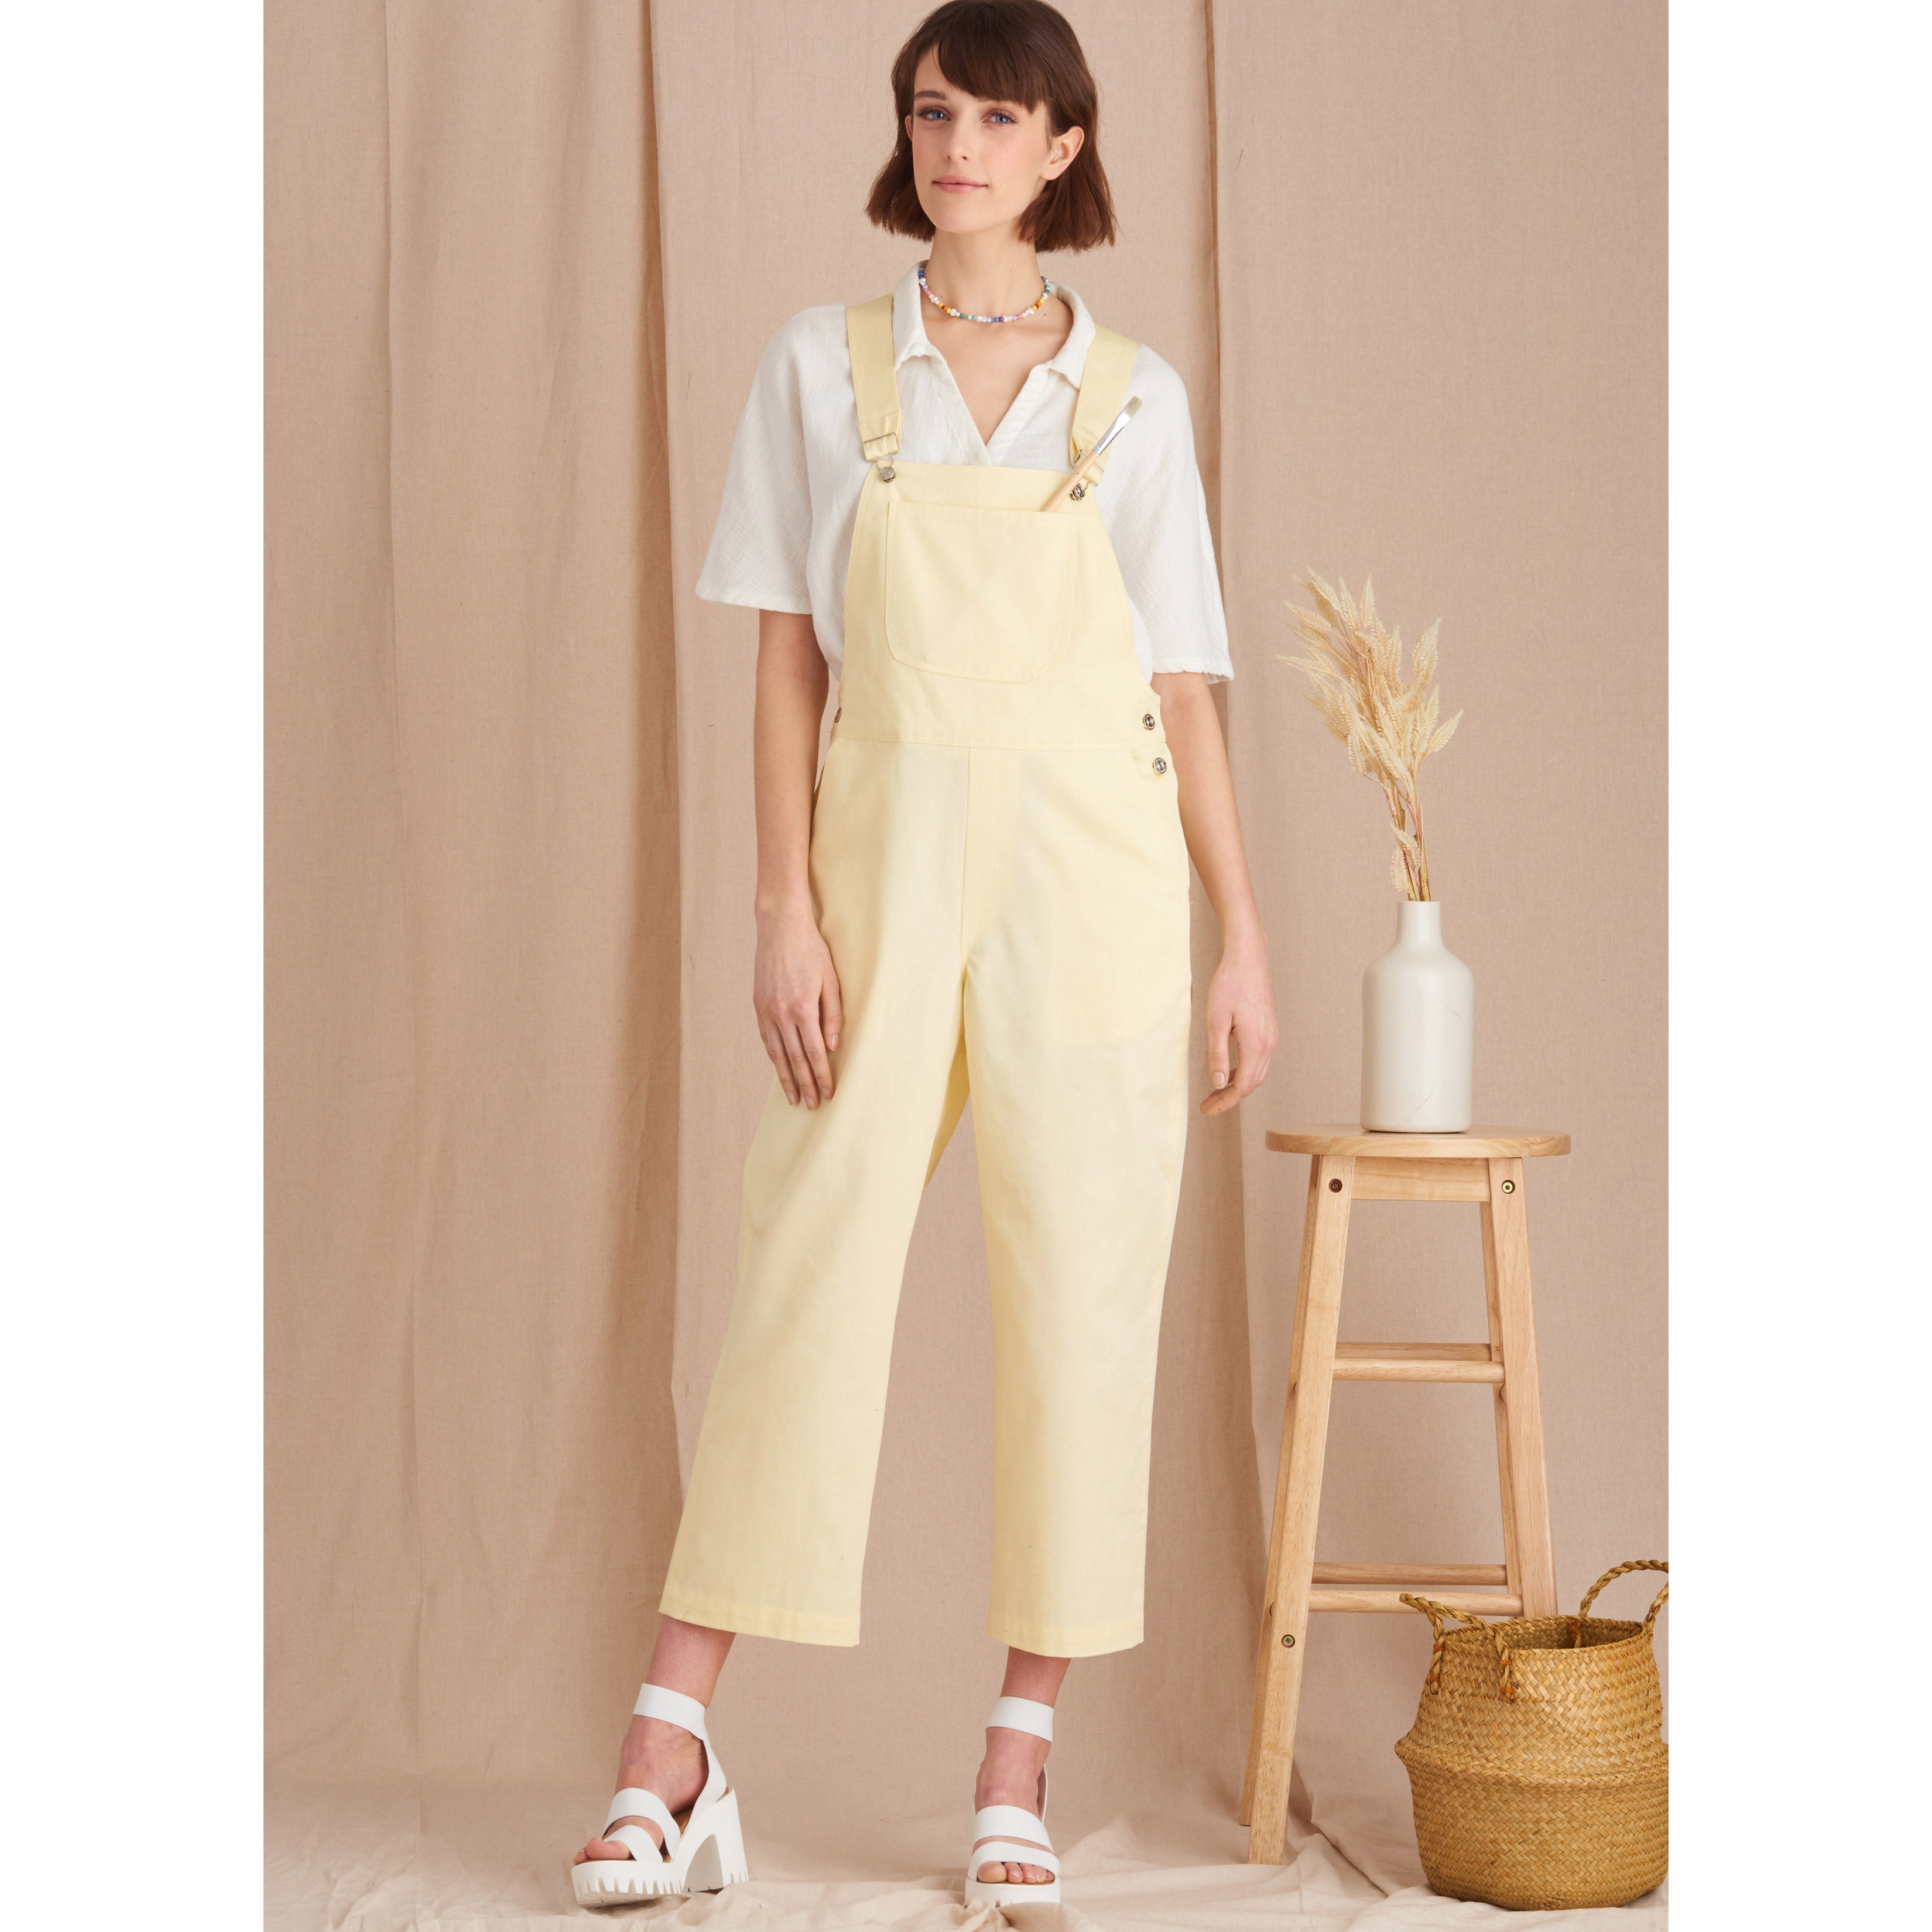 Simplicity Sewing Pattern 9590 Misses' Overalls from Jaycotts Sewing Supplies